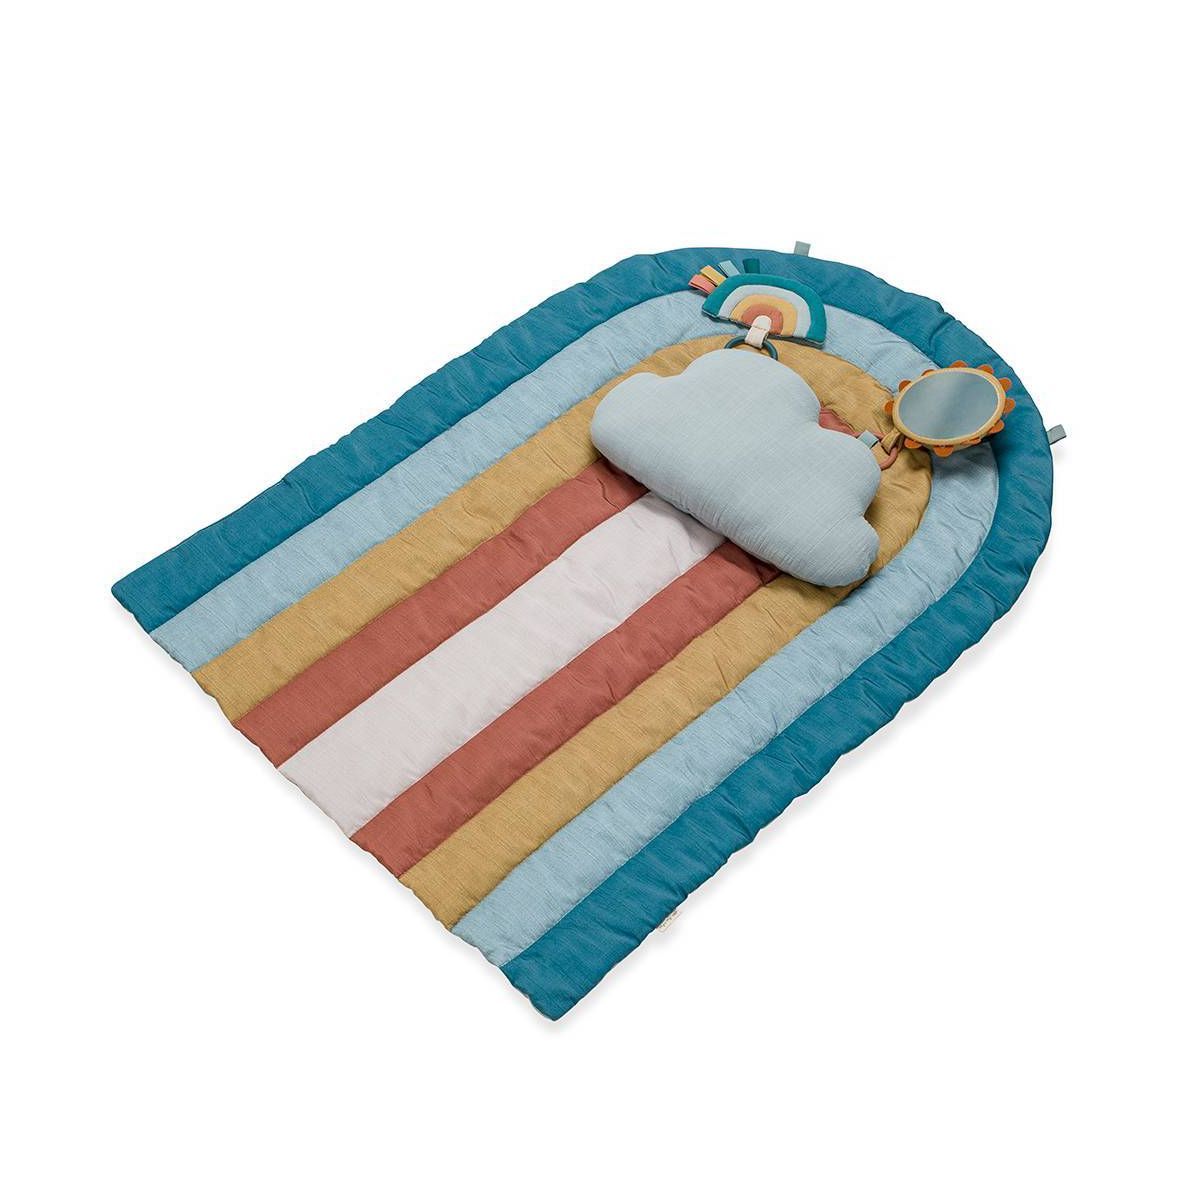 Itzy Ritzy Rainbow Tummy Time Play Mat with Cloud Bolster and Two Toys | Target